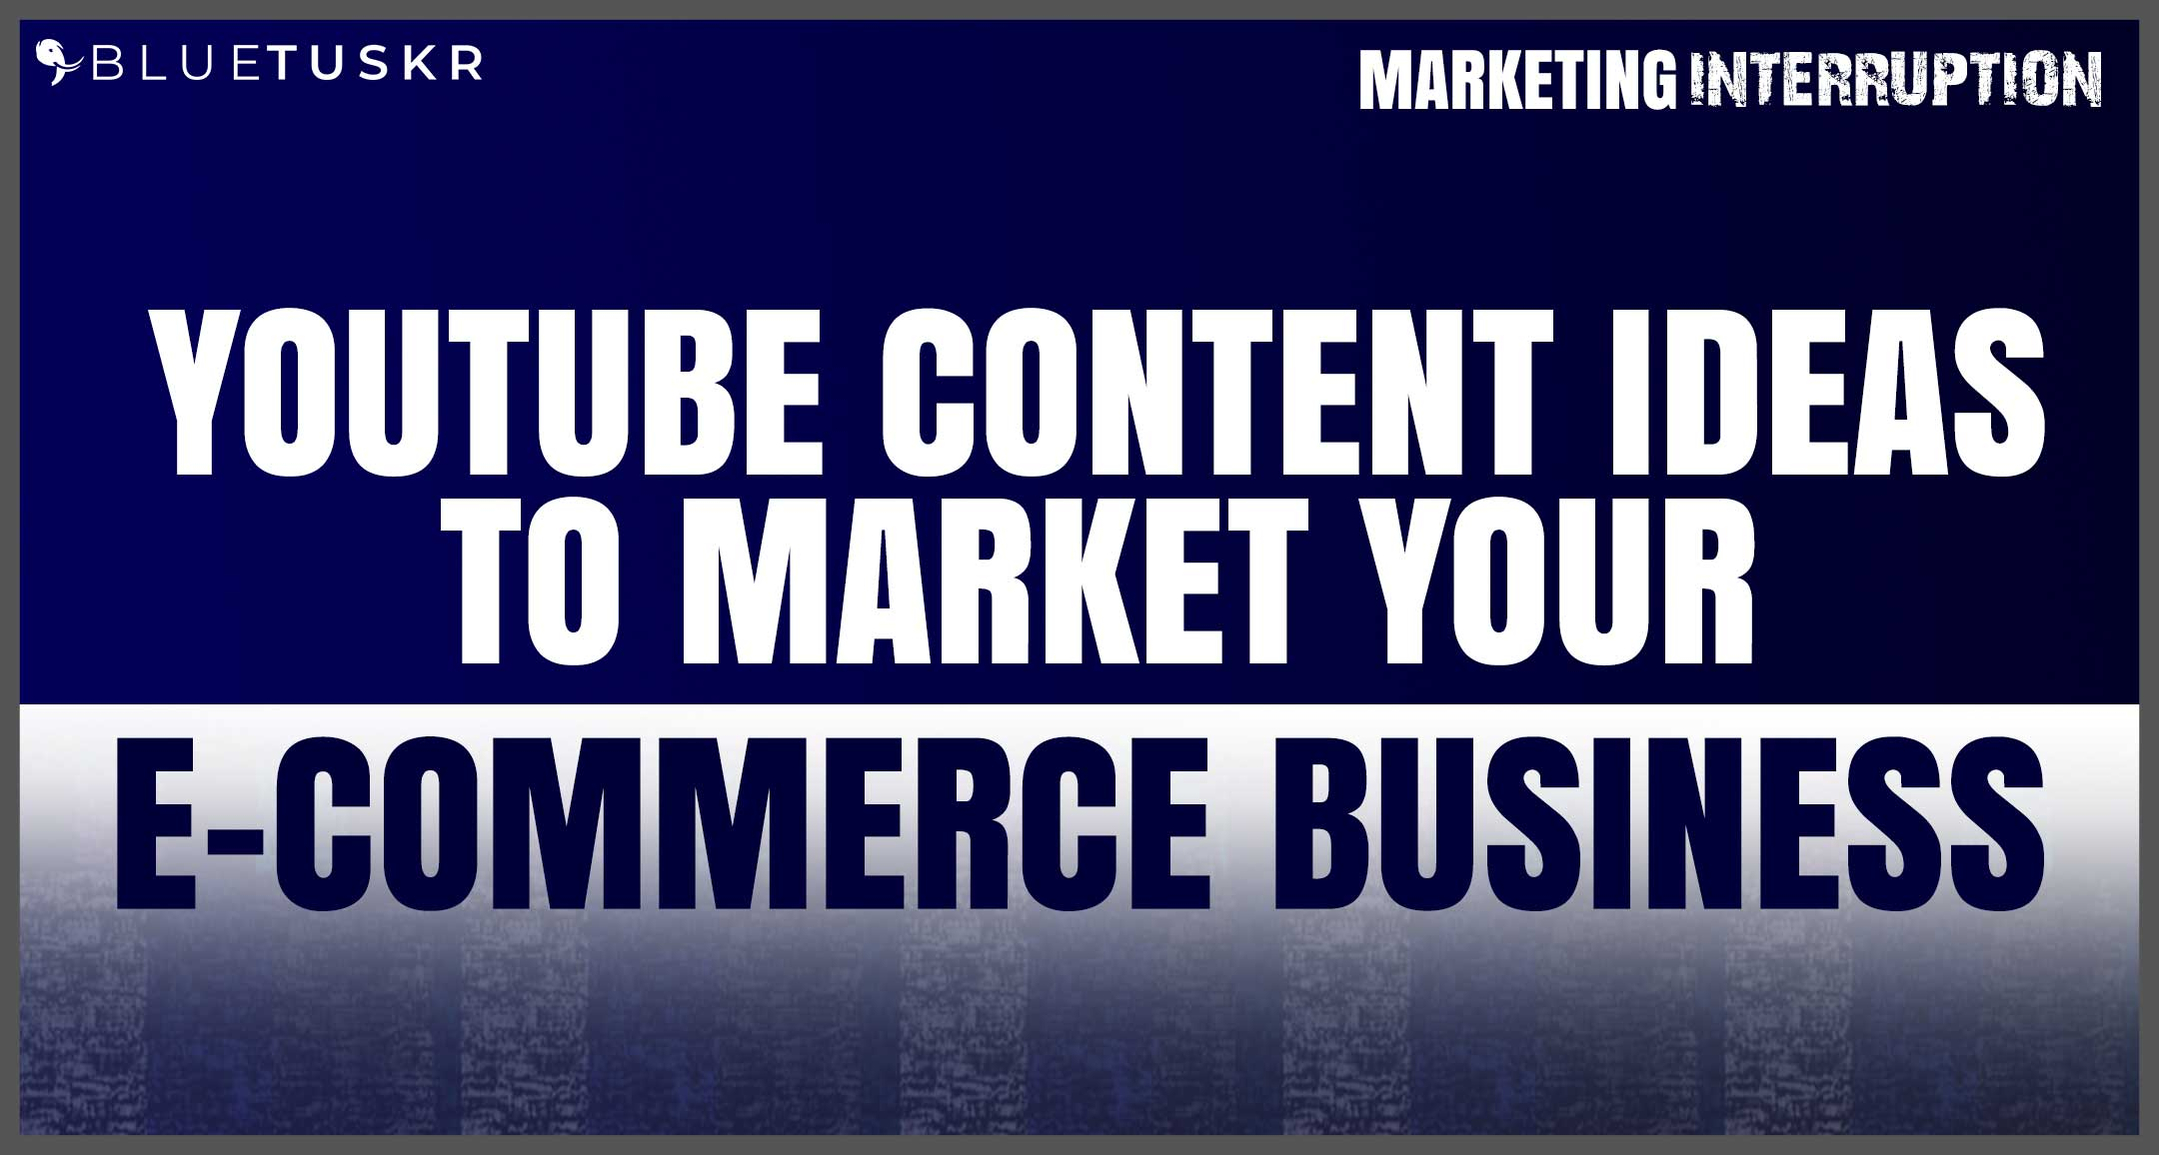 YouTube Content Ideas to Market Your E-commerce Business